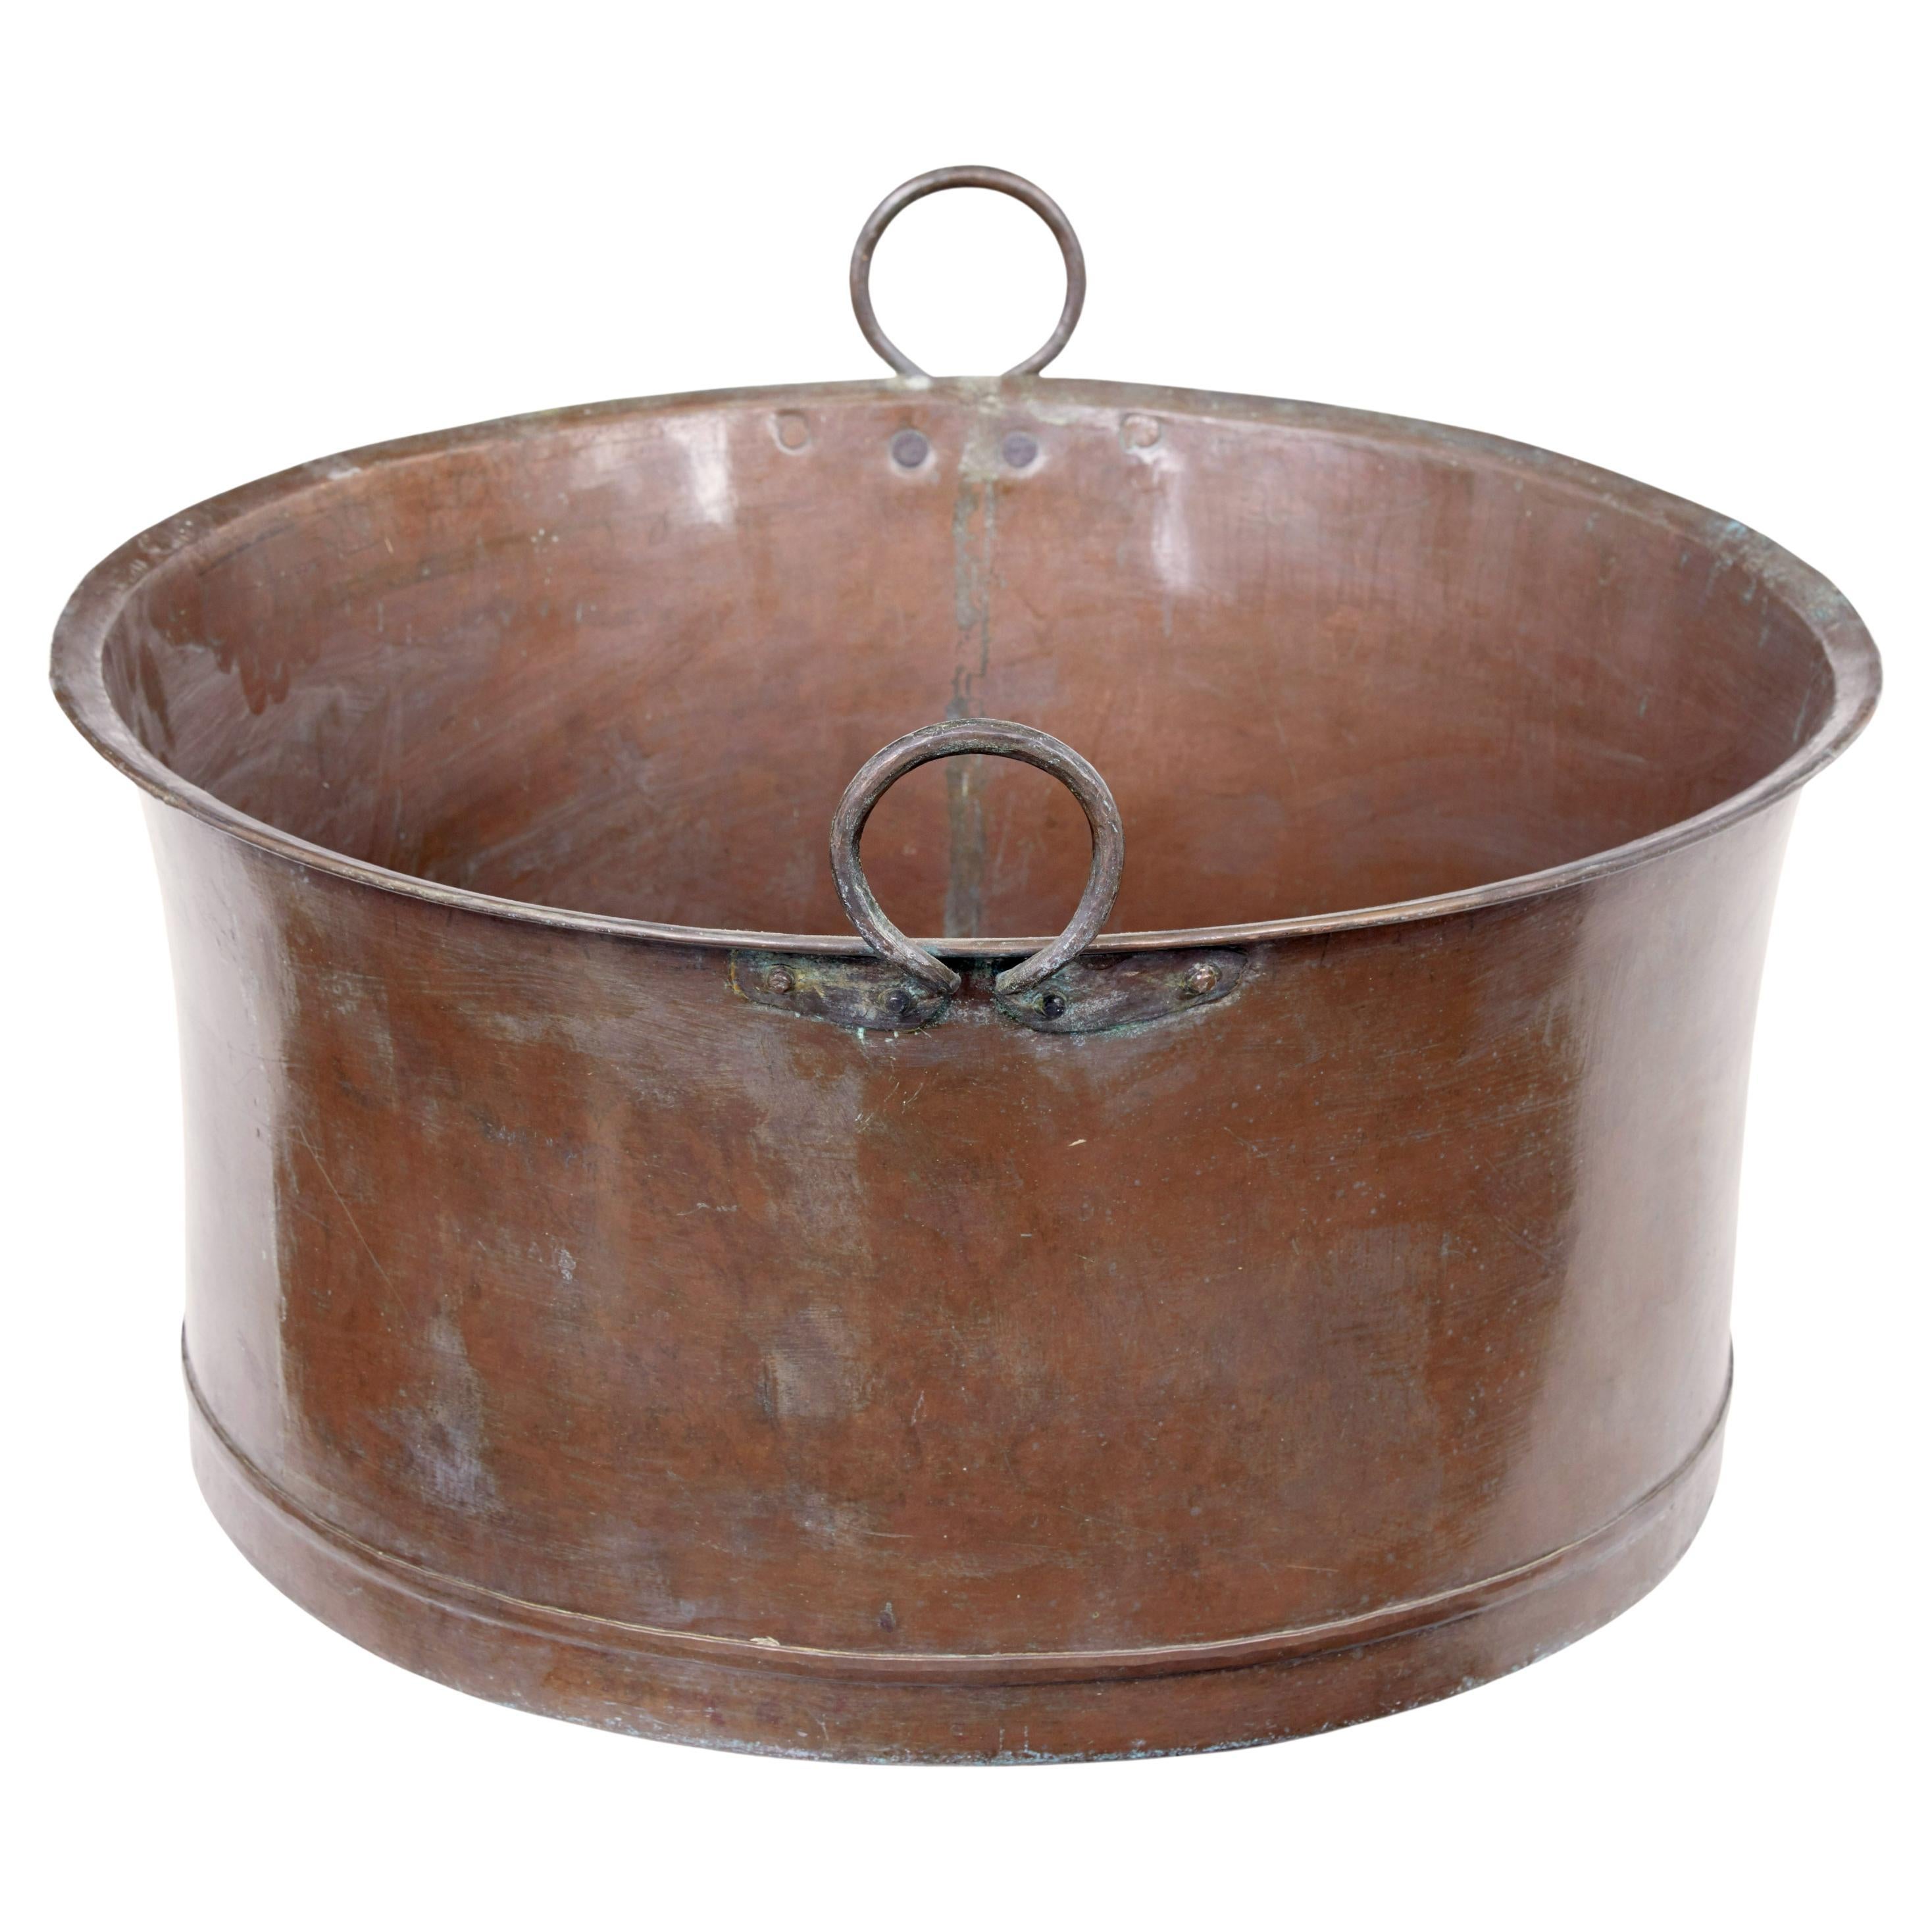 Late 19th Century, Large Copper Cooking Vessel